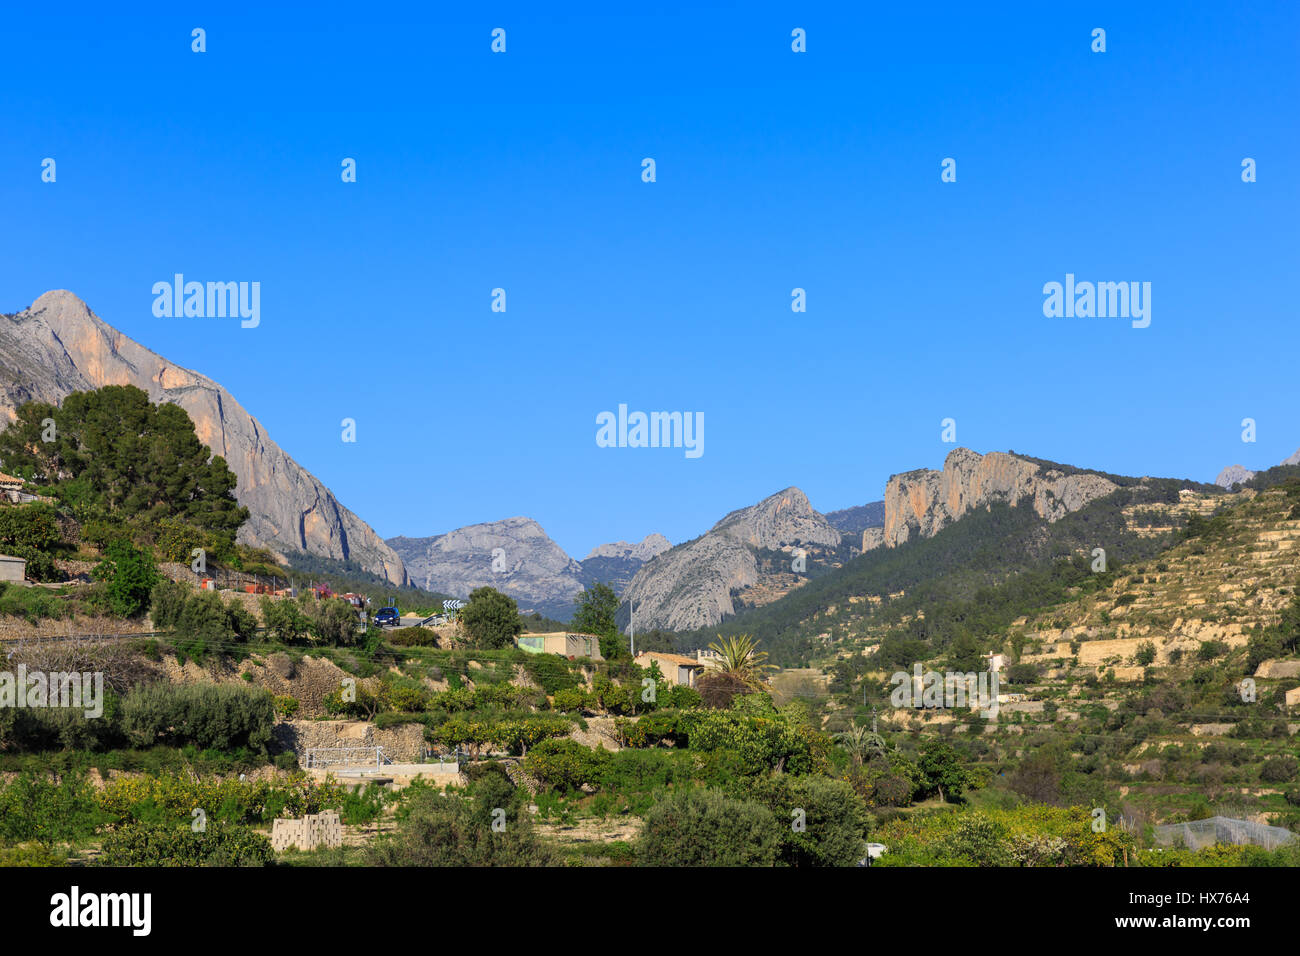 Landscape and mountain range near Sella with clear blue sky, Alicante Mountains, Costa Blanca, Spain Stock Photo